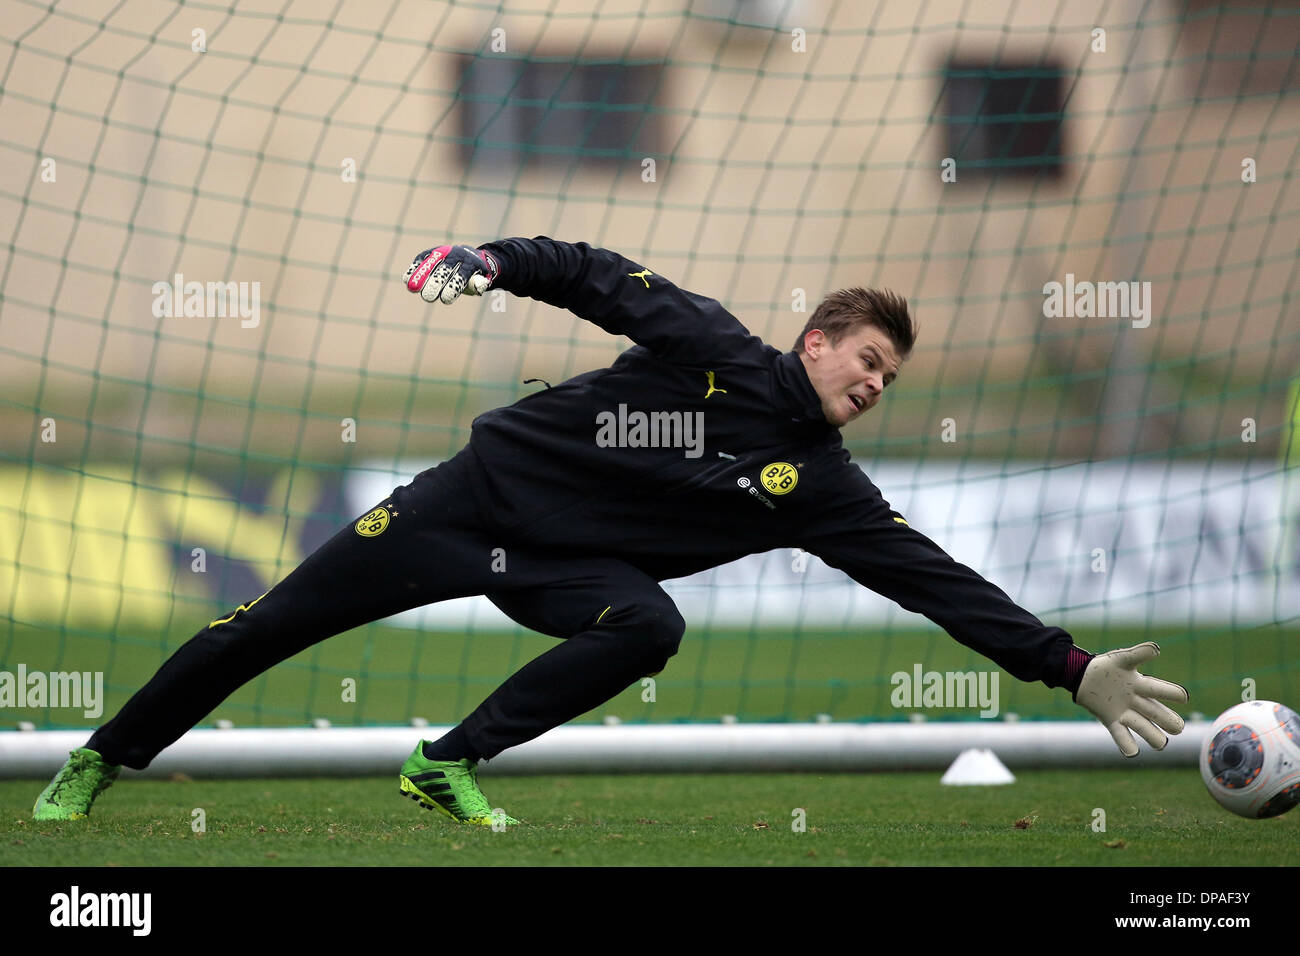 La Manga, Spain. 10th Jan, 2014. Goalkeeper Mitchell Langerak takes part in a training session Borussia Dortmund's training camp in La Manga, Spain, 10 January 2014. The German Bundesliga team is preparing for the second part of the season at their training camp in Spain. Photo: KEVIN KUREK/dpa/Alamy Live News Stock Photo